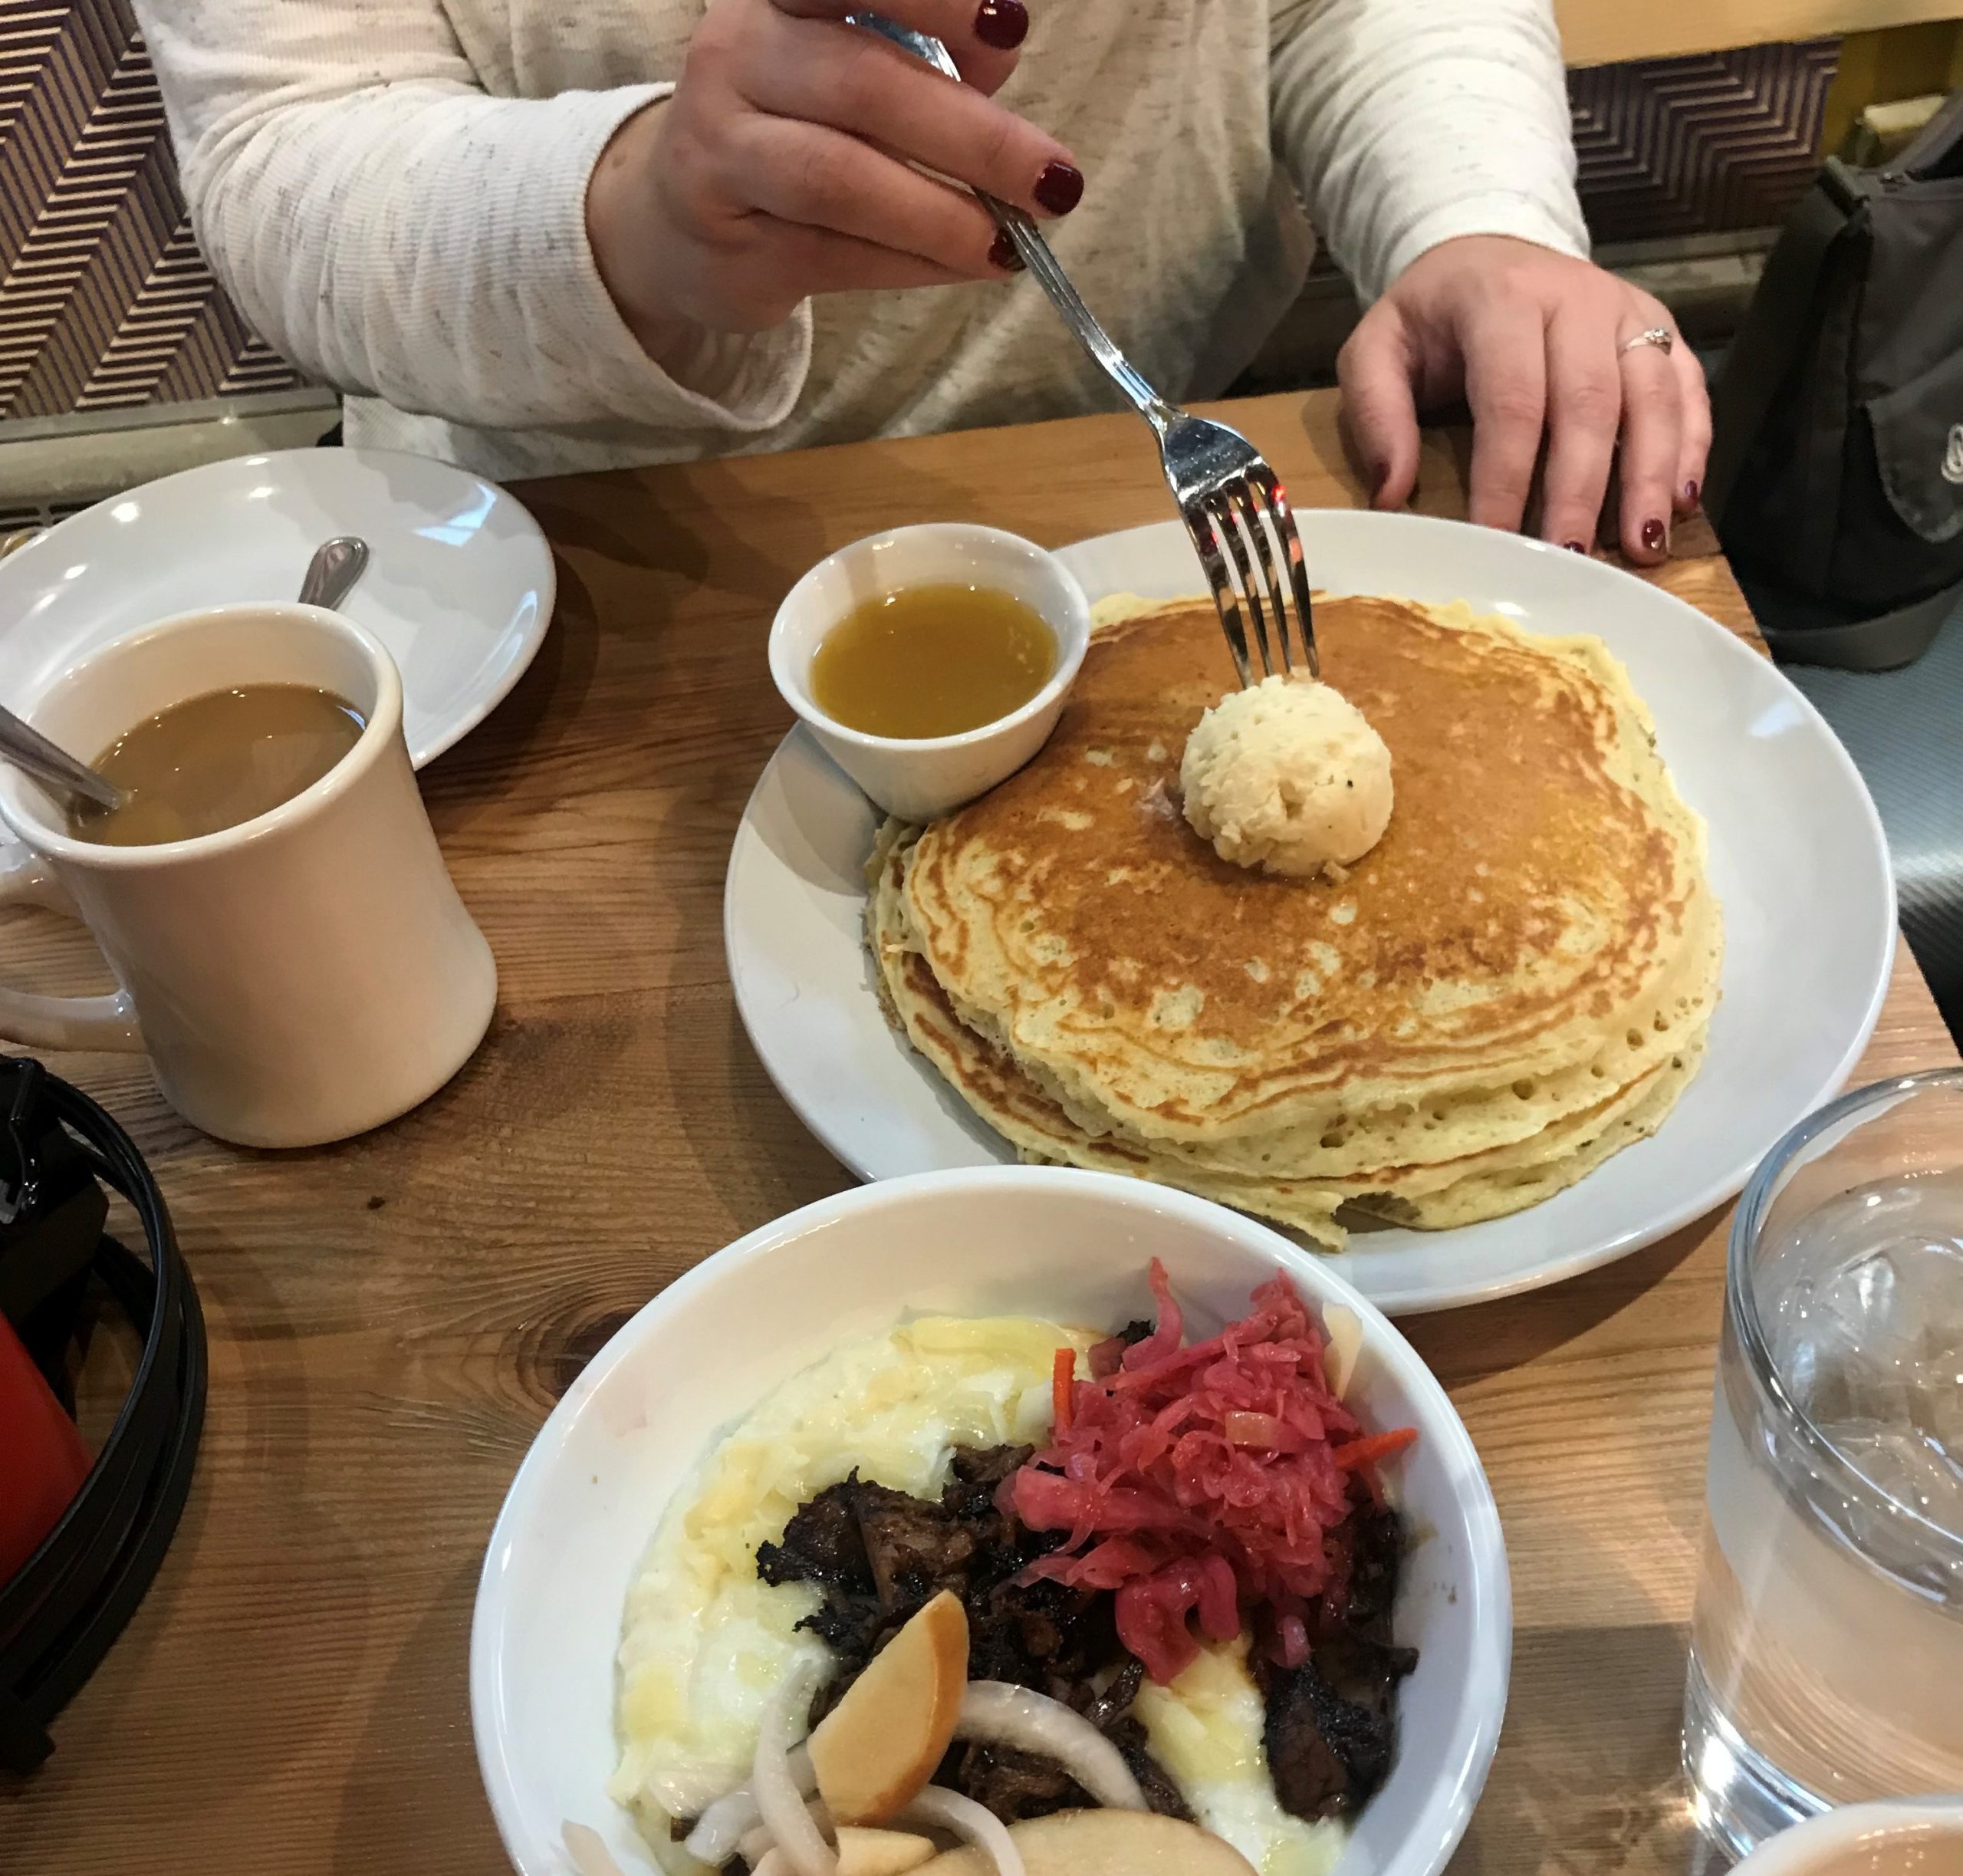 A hand cutting into pancakes with a fork, surrounded by other breakfast dishes.